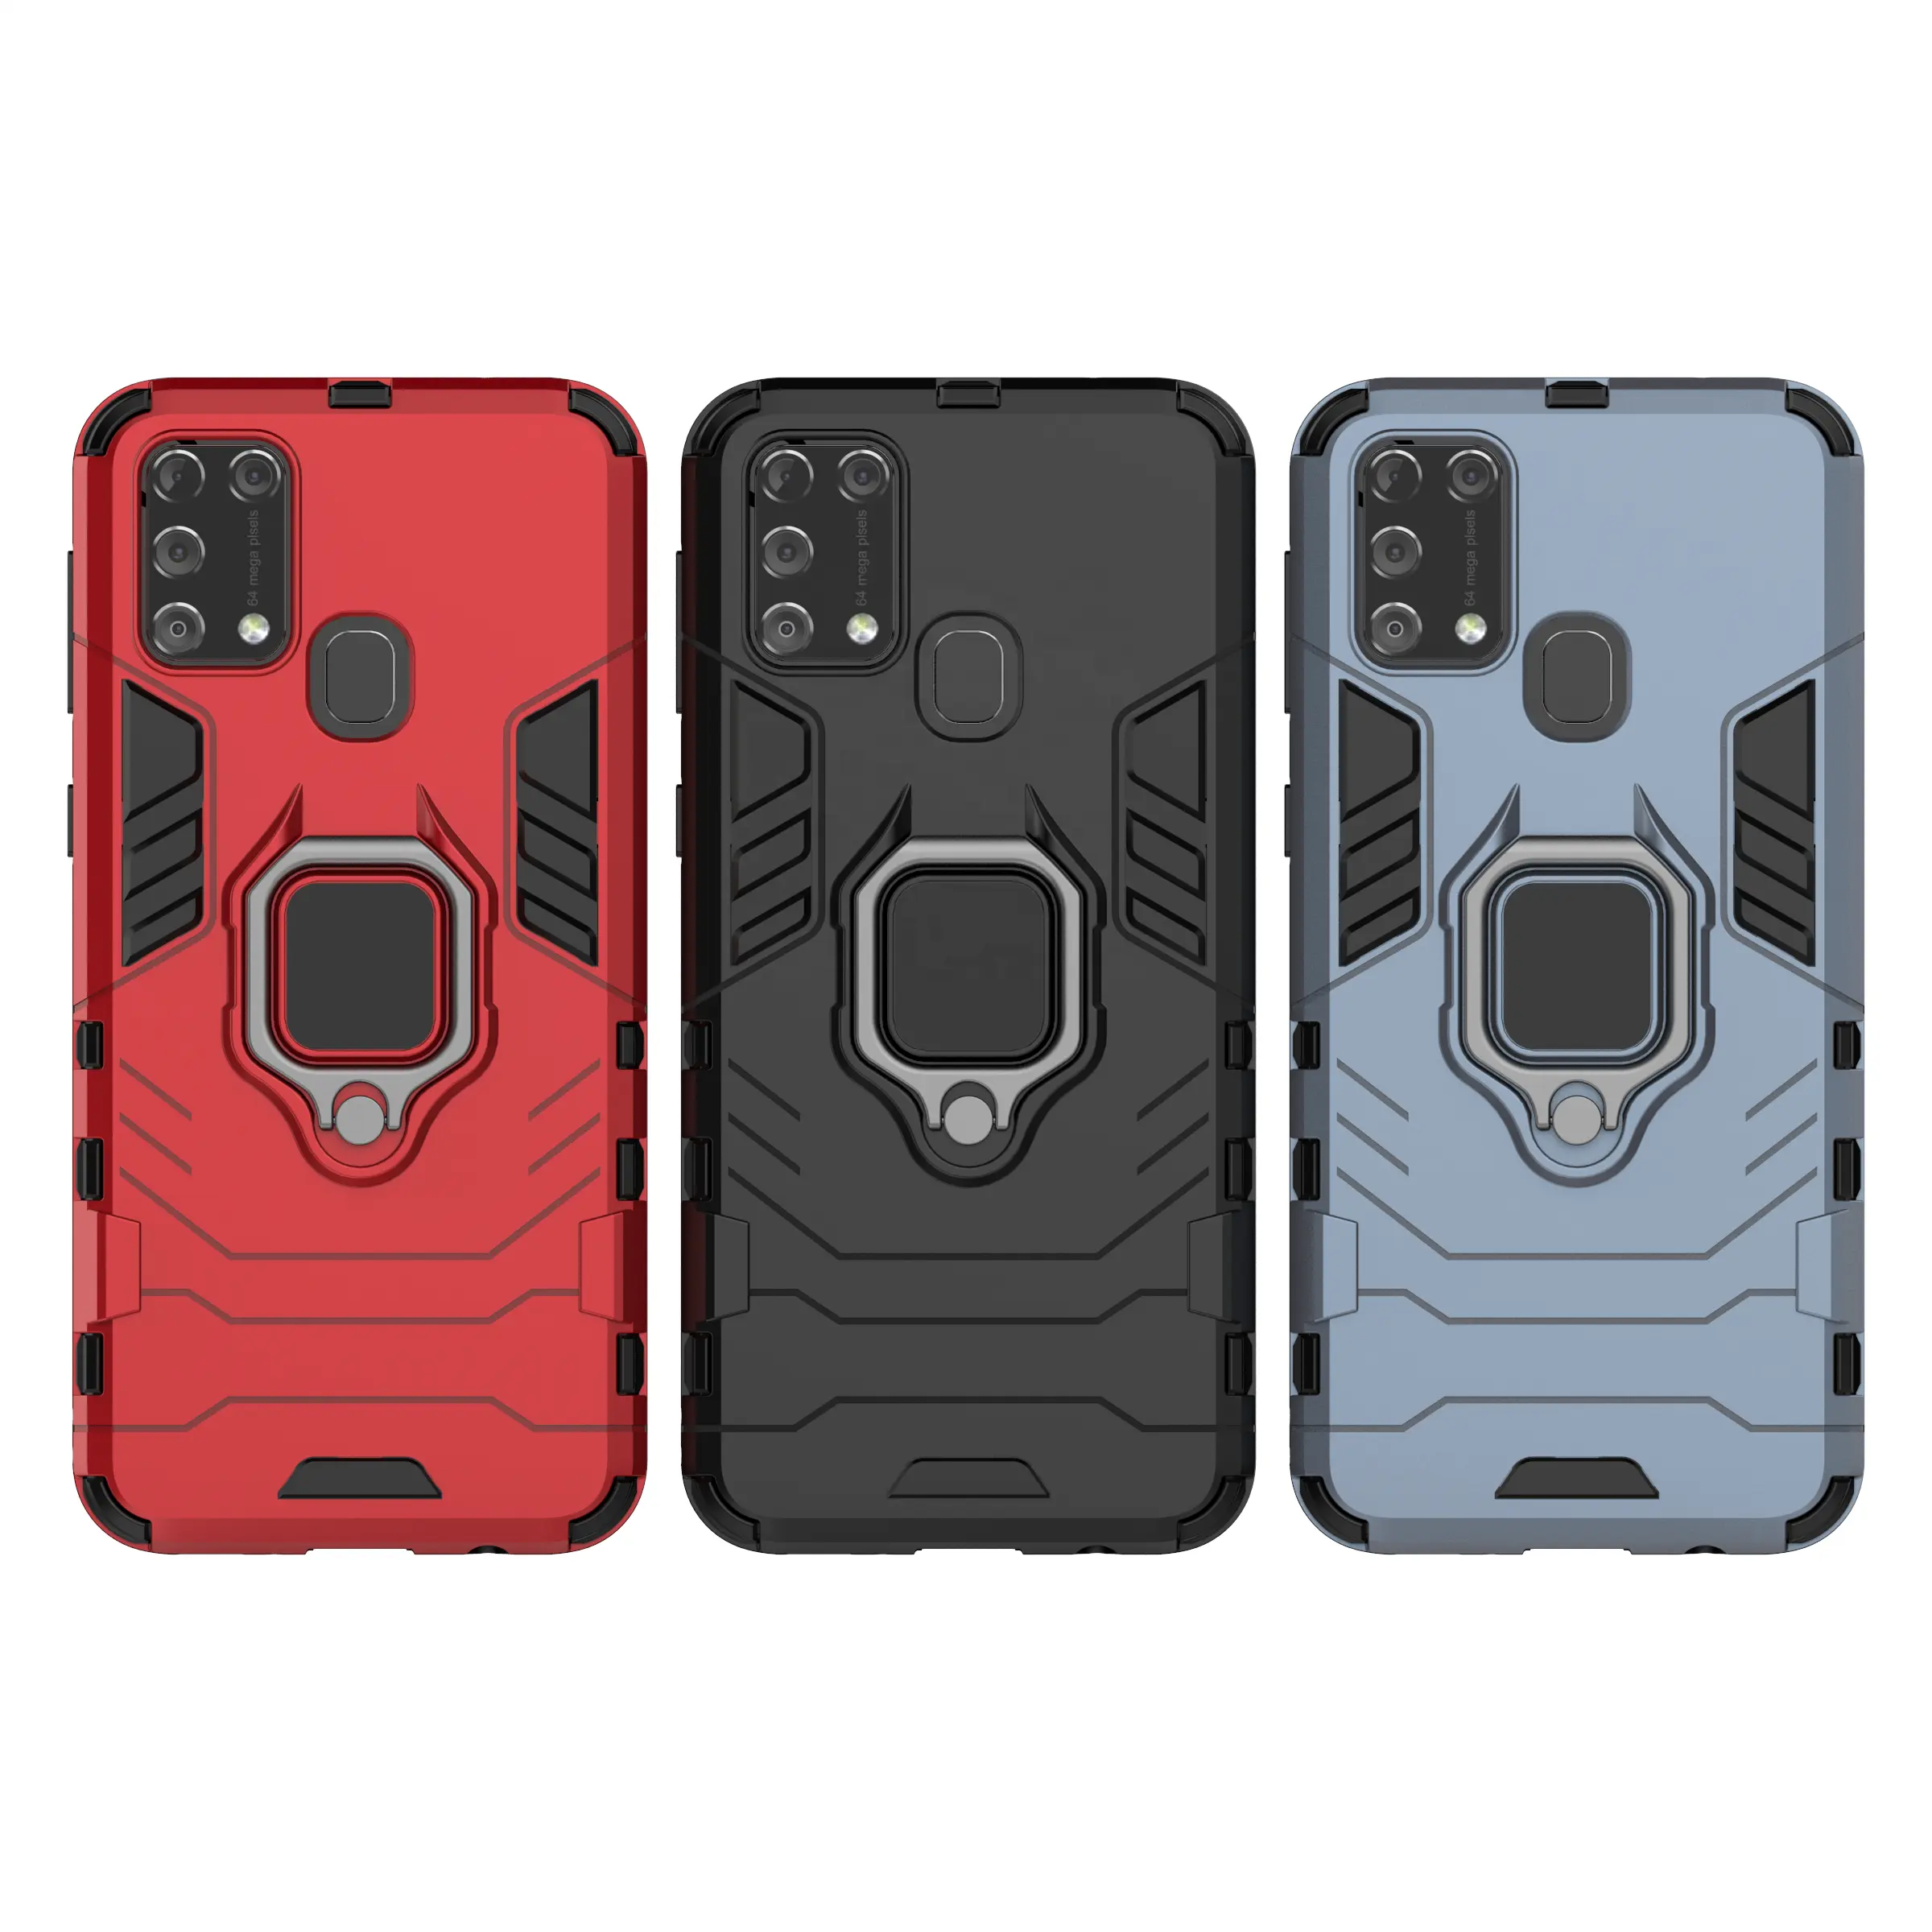 SAIBORO Shockproof pc hard mobile phone case for samsung galaxy j8 m31 m30s kickstand case back cover for samsung s20